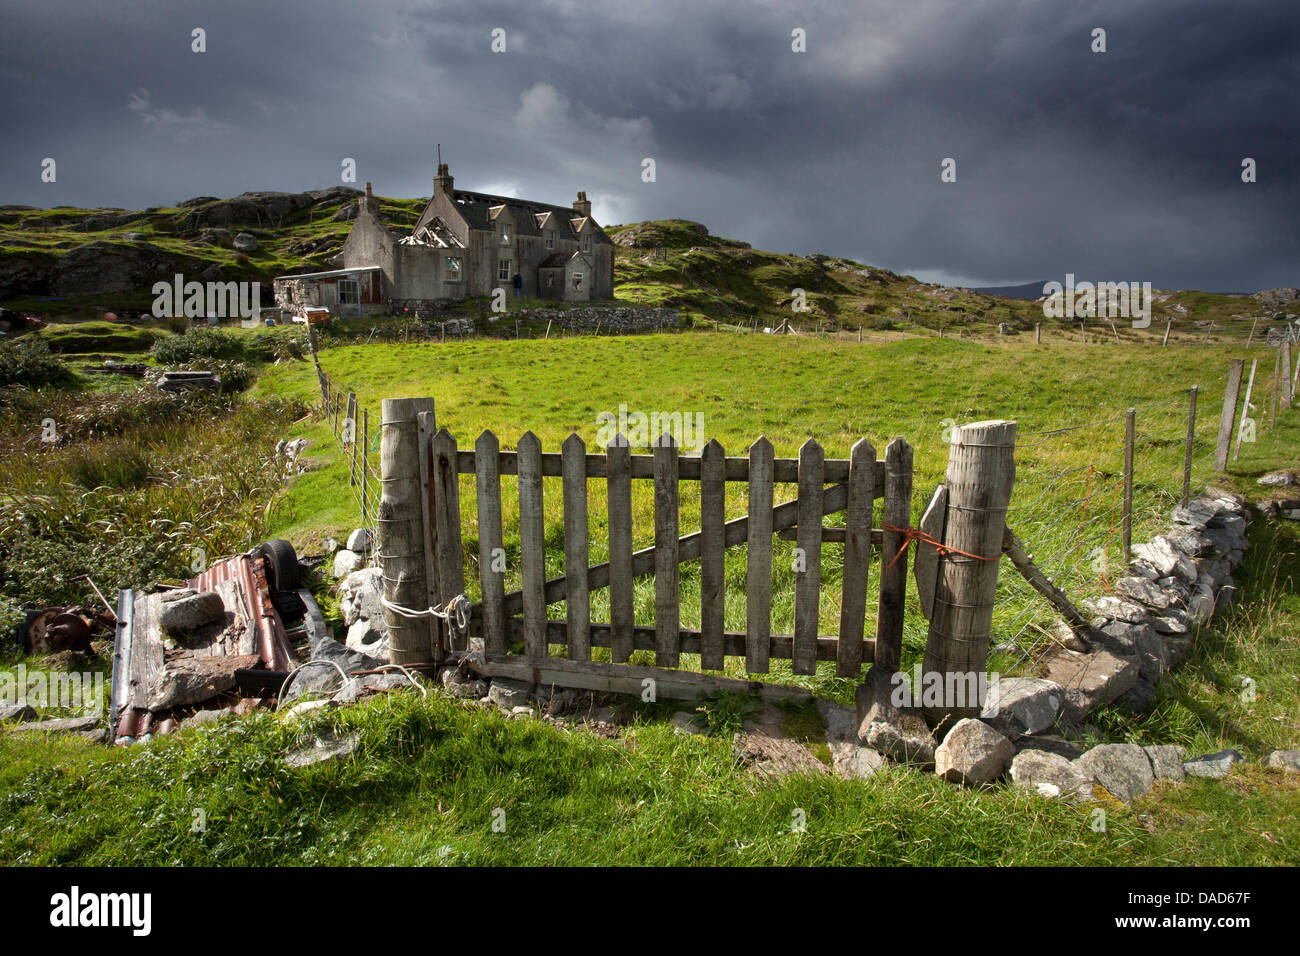 Abandoned croft beneath a stormy sky in the township of Manish on the east coast of The Isle of Harris, Outer Hebrides, Scotland Stock Photo